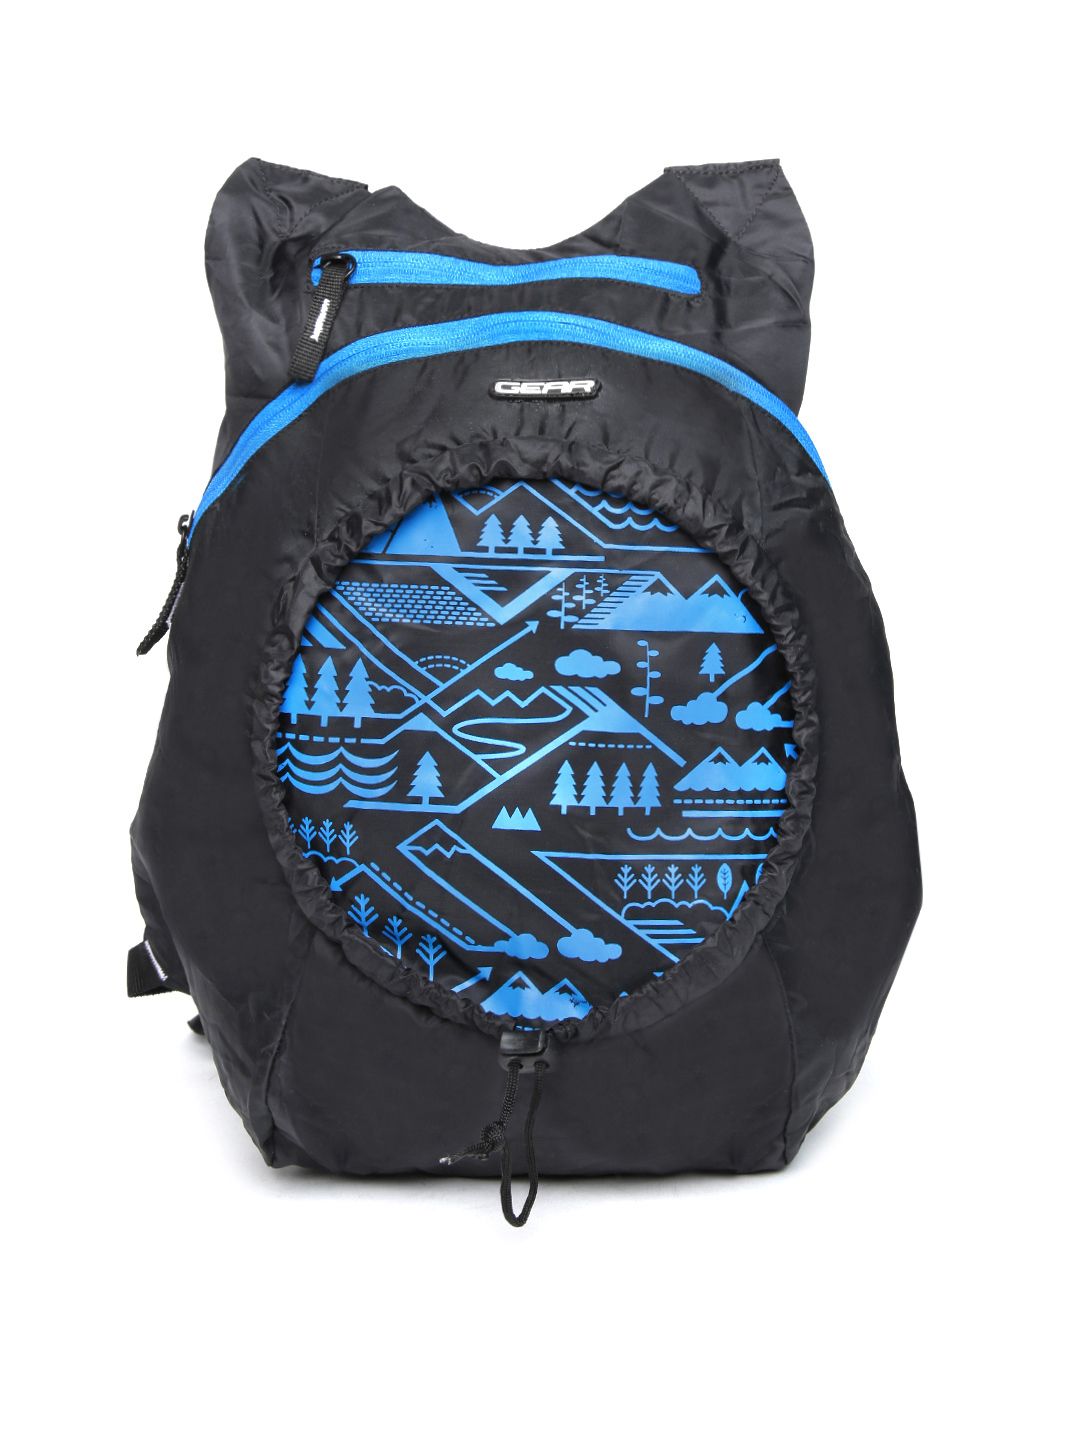 Gear Unisex Black Printed Foldable Backpack Price in India